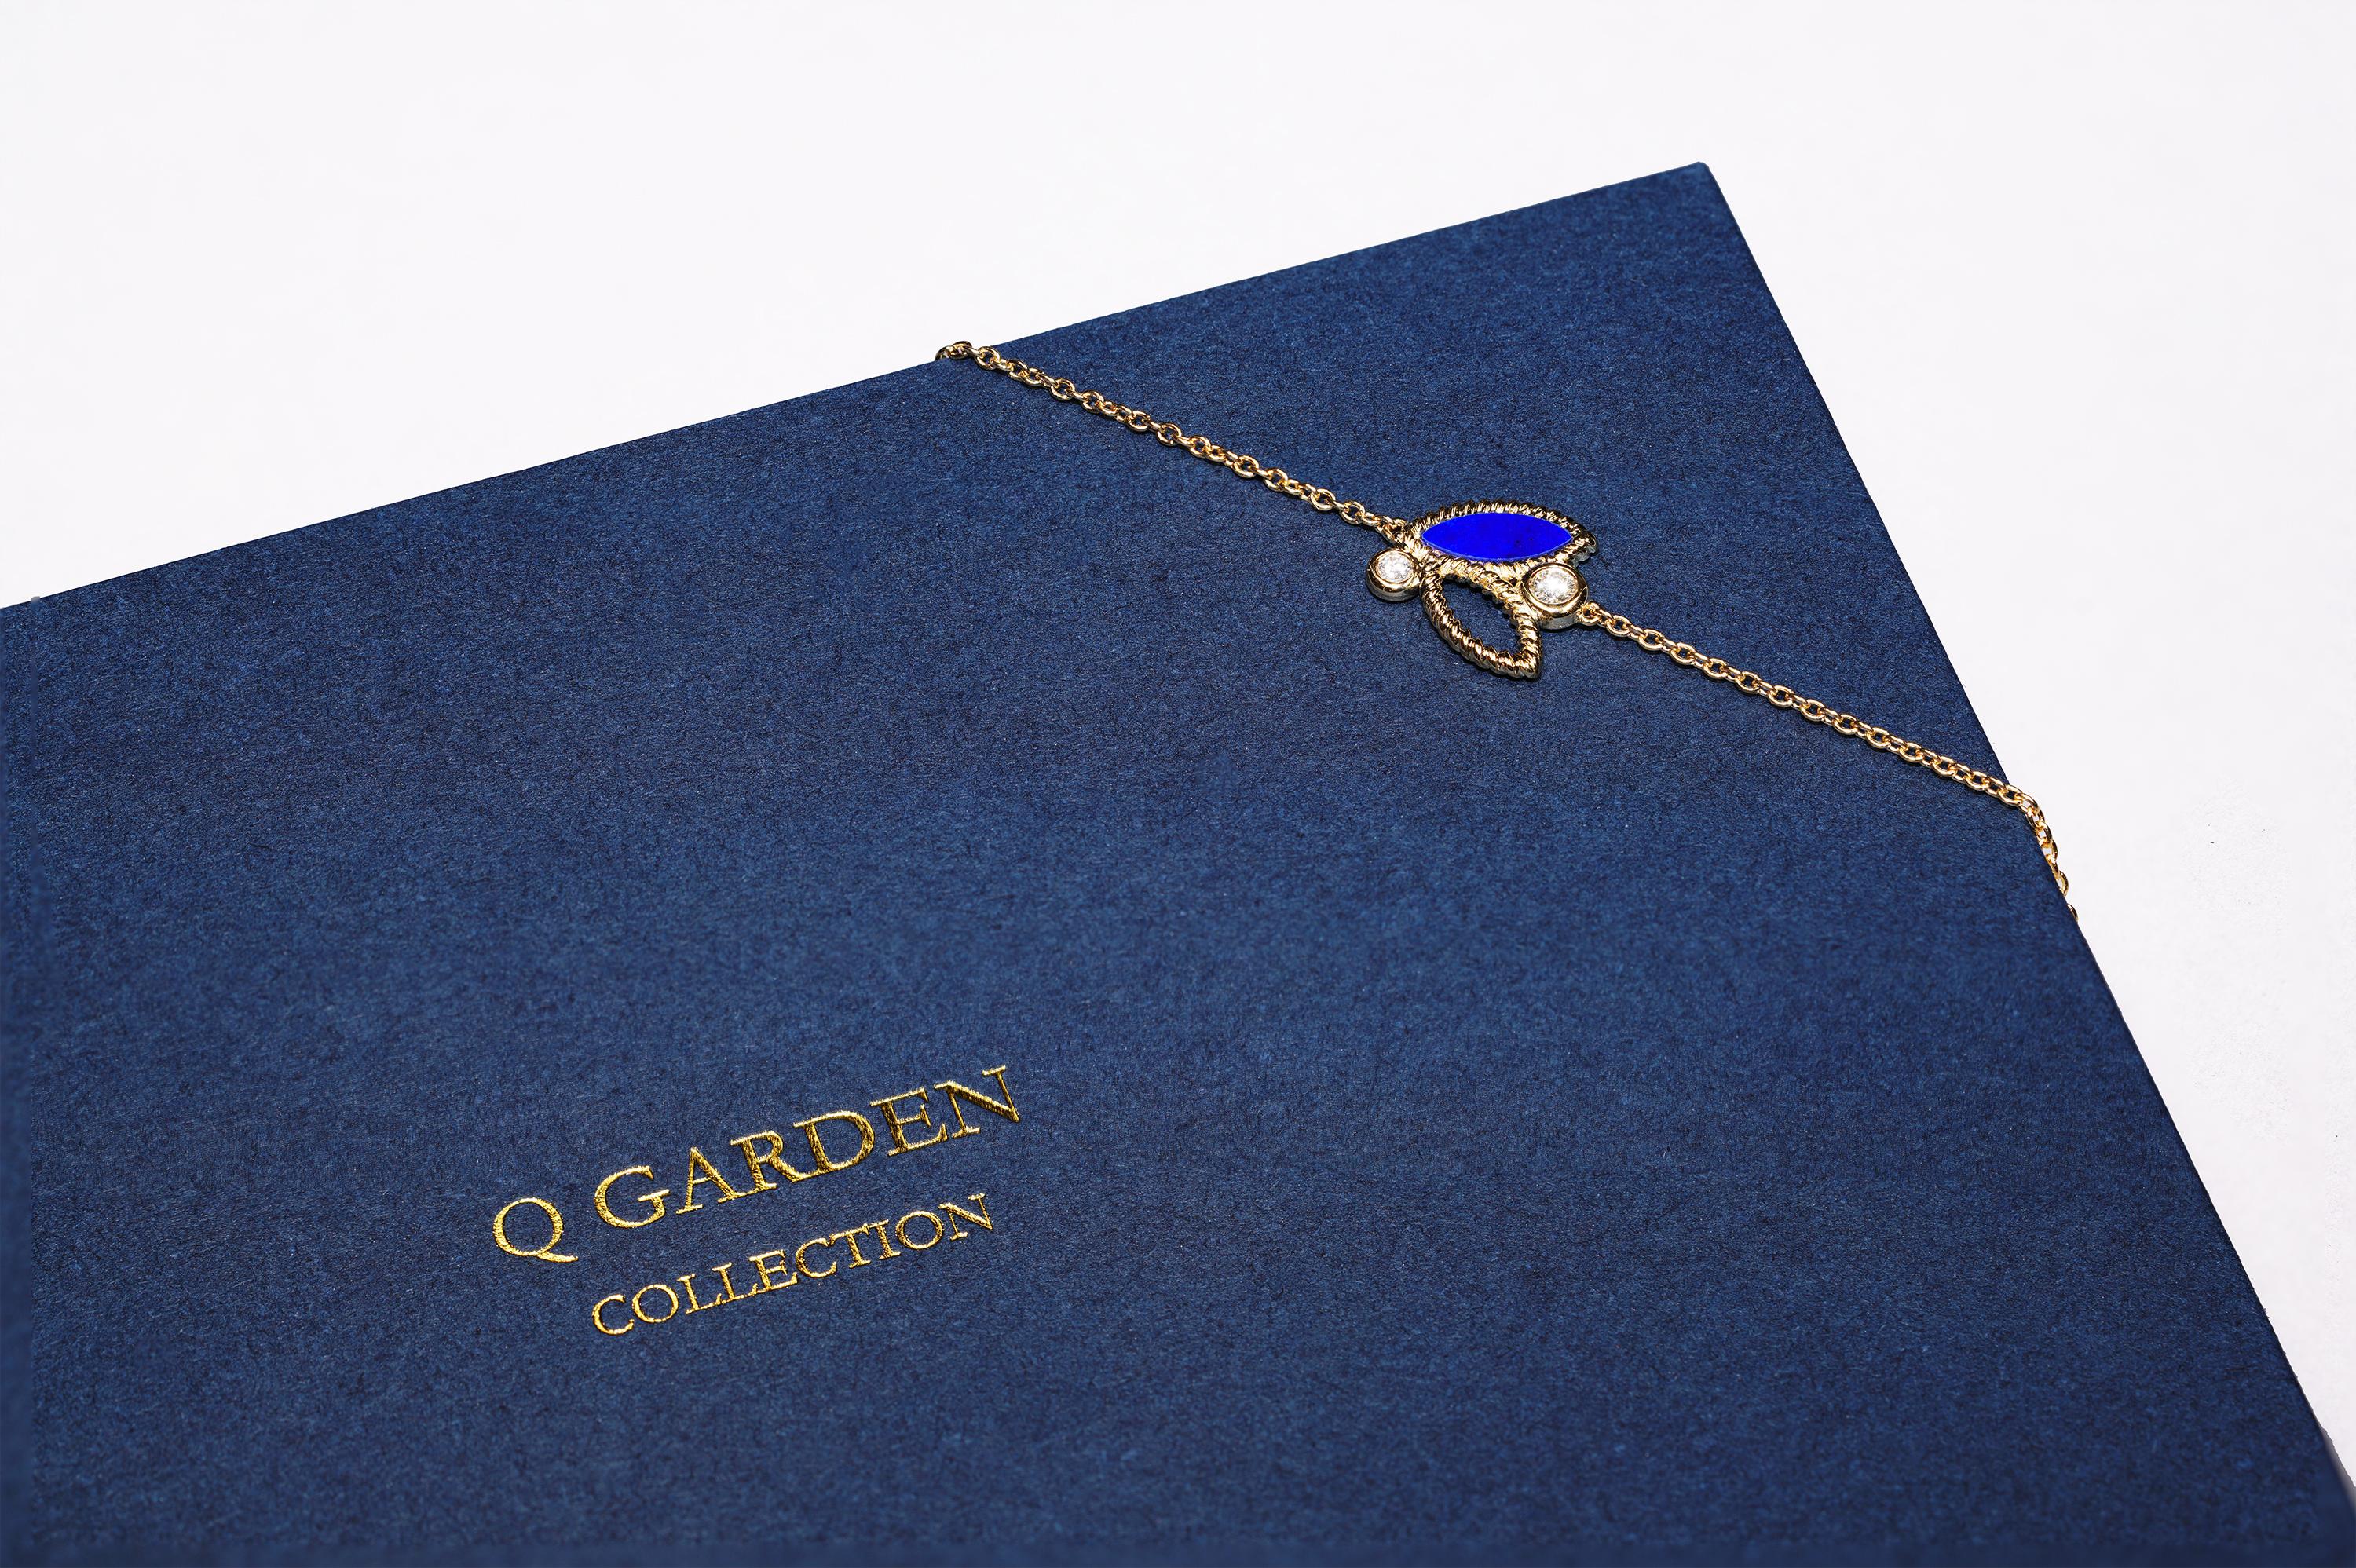 18k yellow gold, 2.9g.  
3 Diamonds, Total Carat Weight: 0.12ct 
Stone: Lapis Lazuli

This charming mini bracelet is the ideal piece for any occasion. As the latest addition to the popular Q Garden collection, the Mini Q Garden collection includes